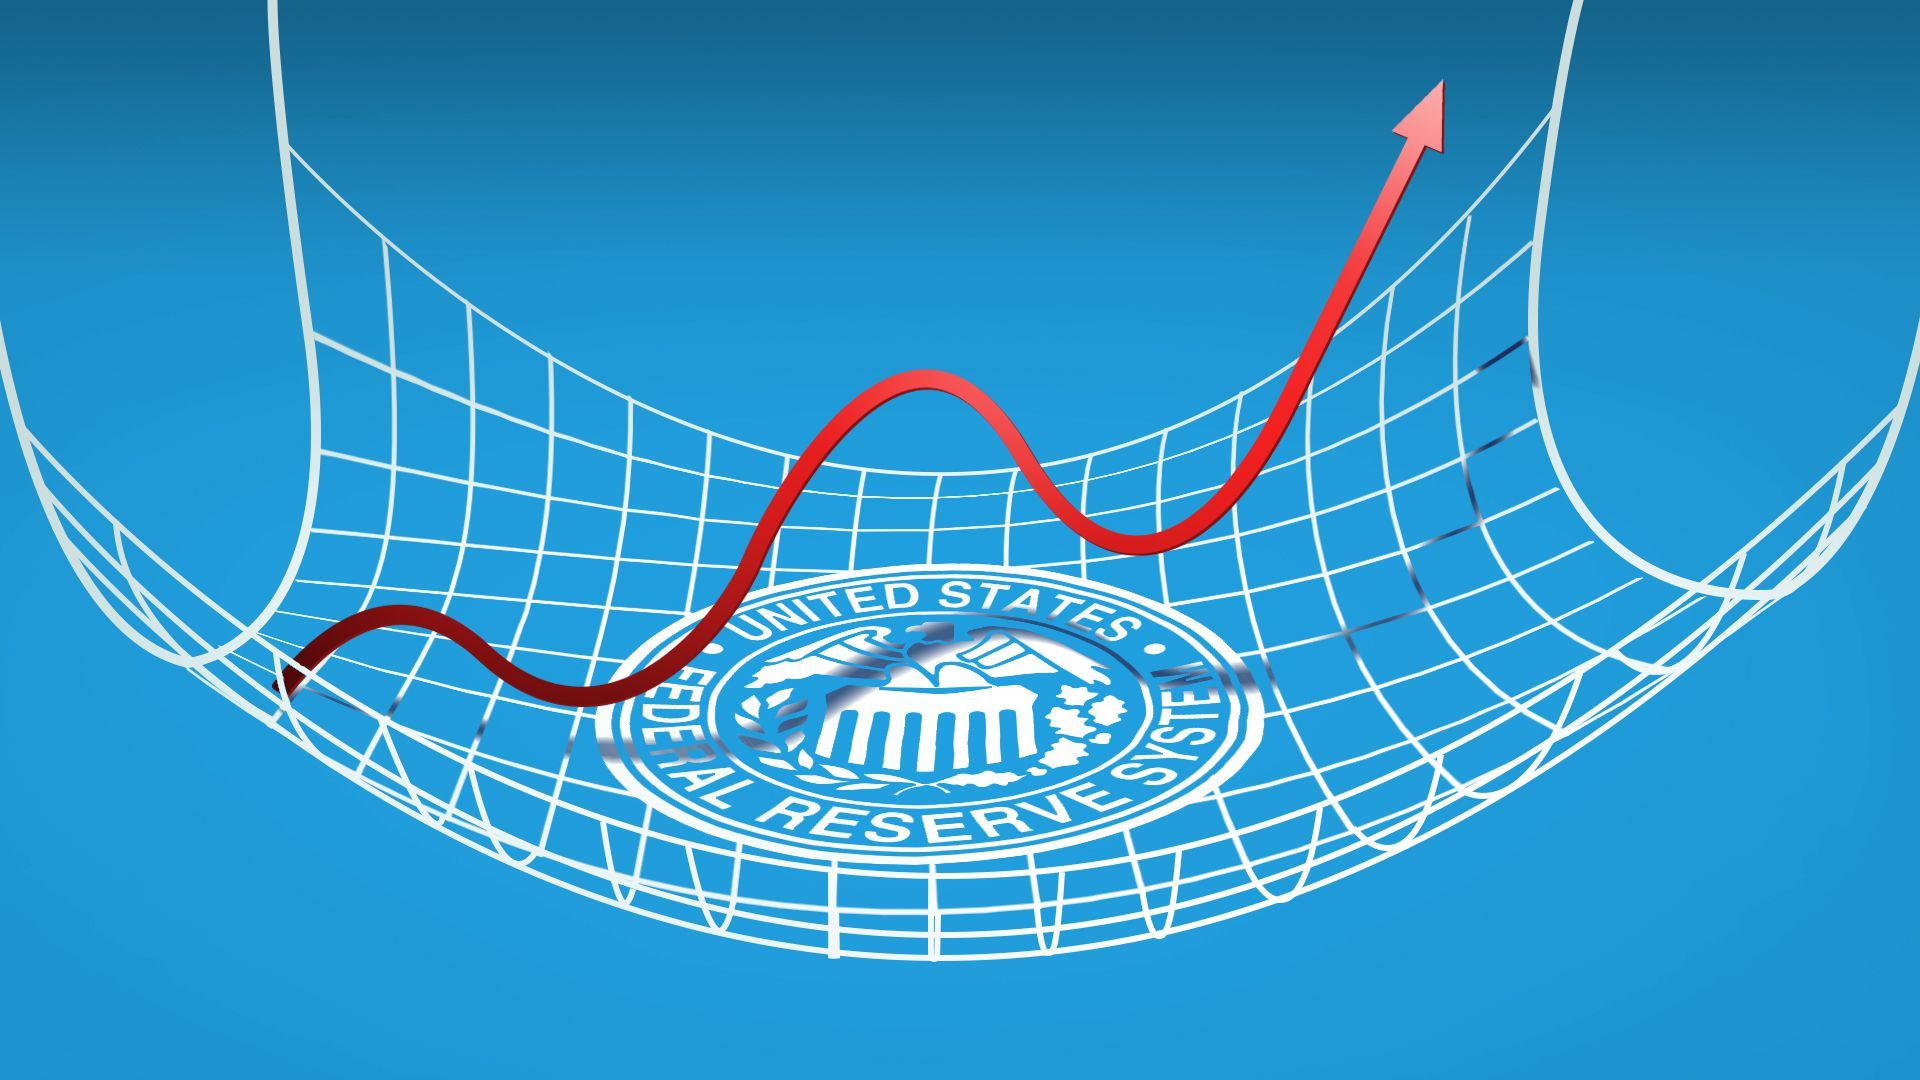 Illustration of a stock trend line bouncing upward from a safety net with the Federal Reserve seal in the center